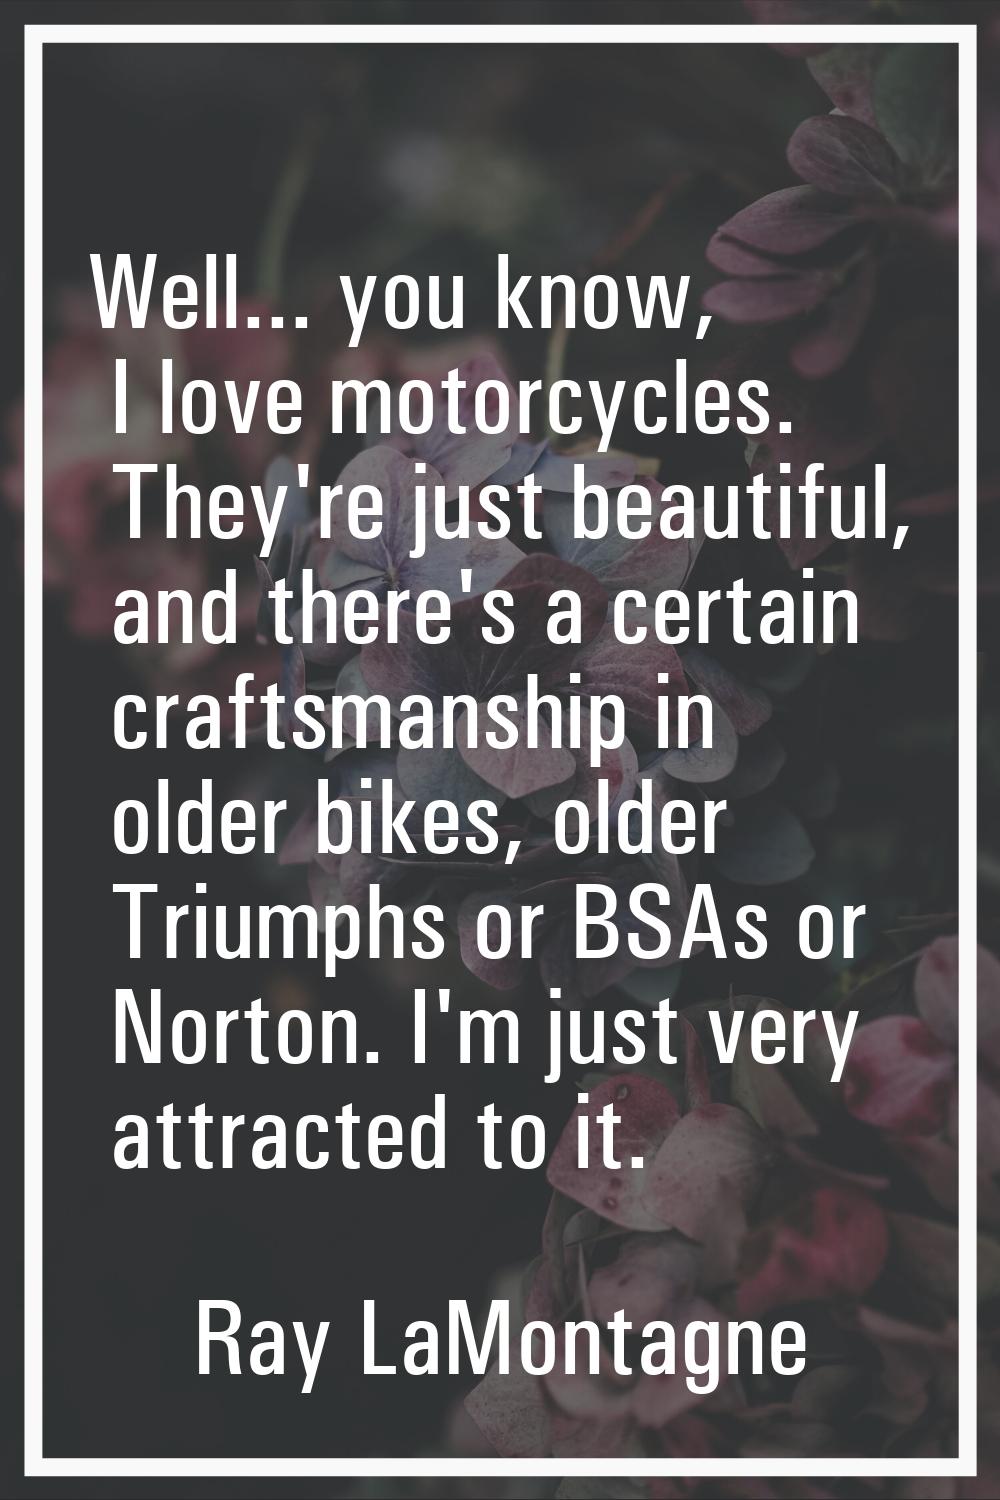 Well... you know, I love motorcycles. They're just beautiful, and there's a certain craftsmanship i